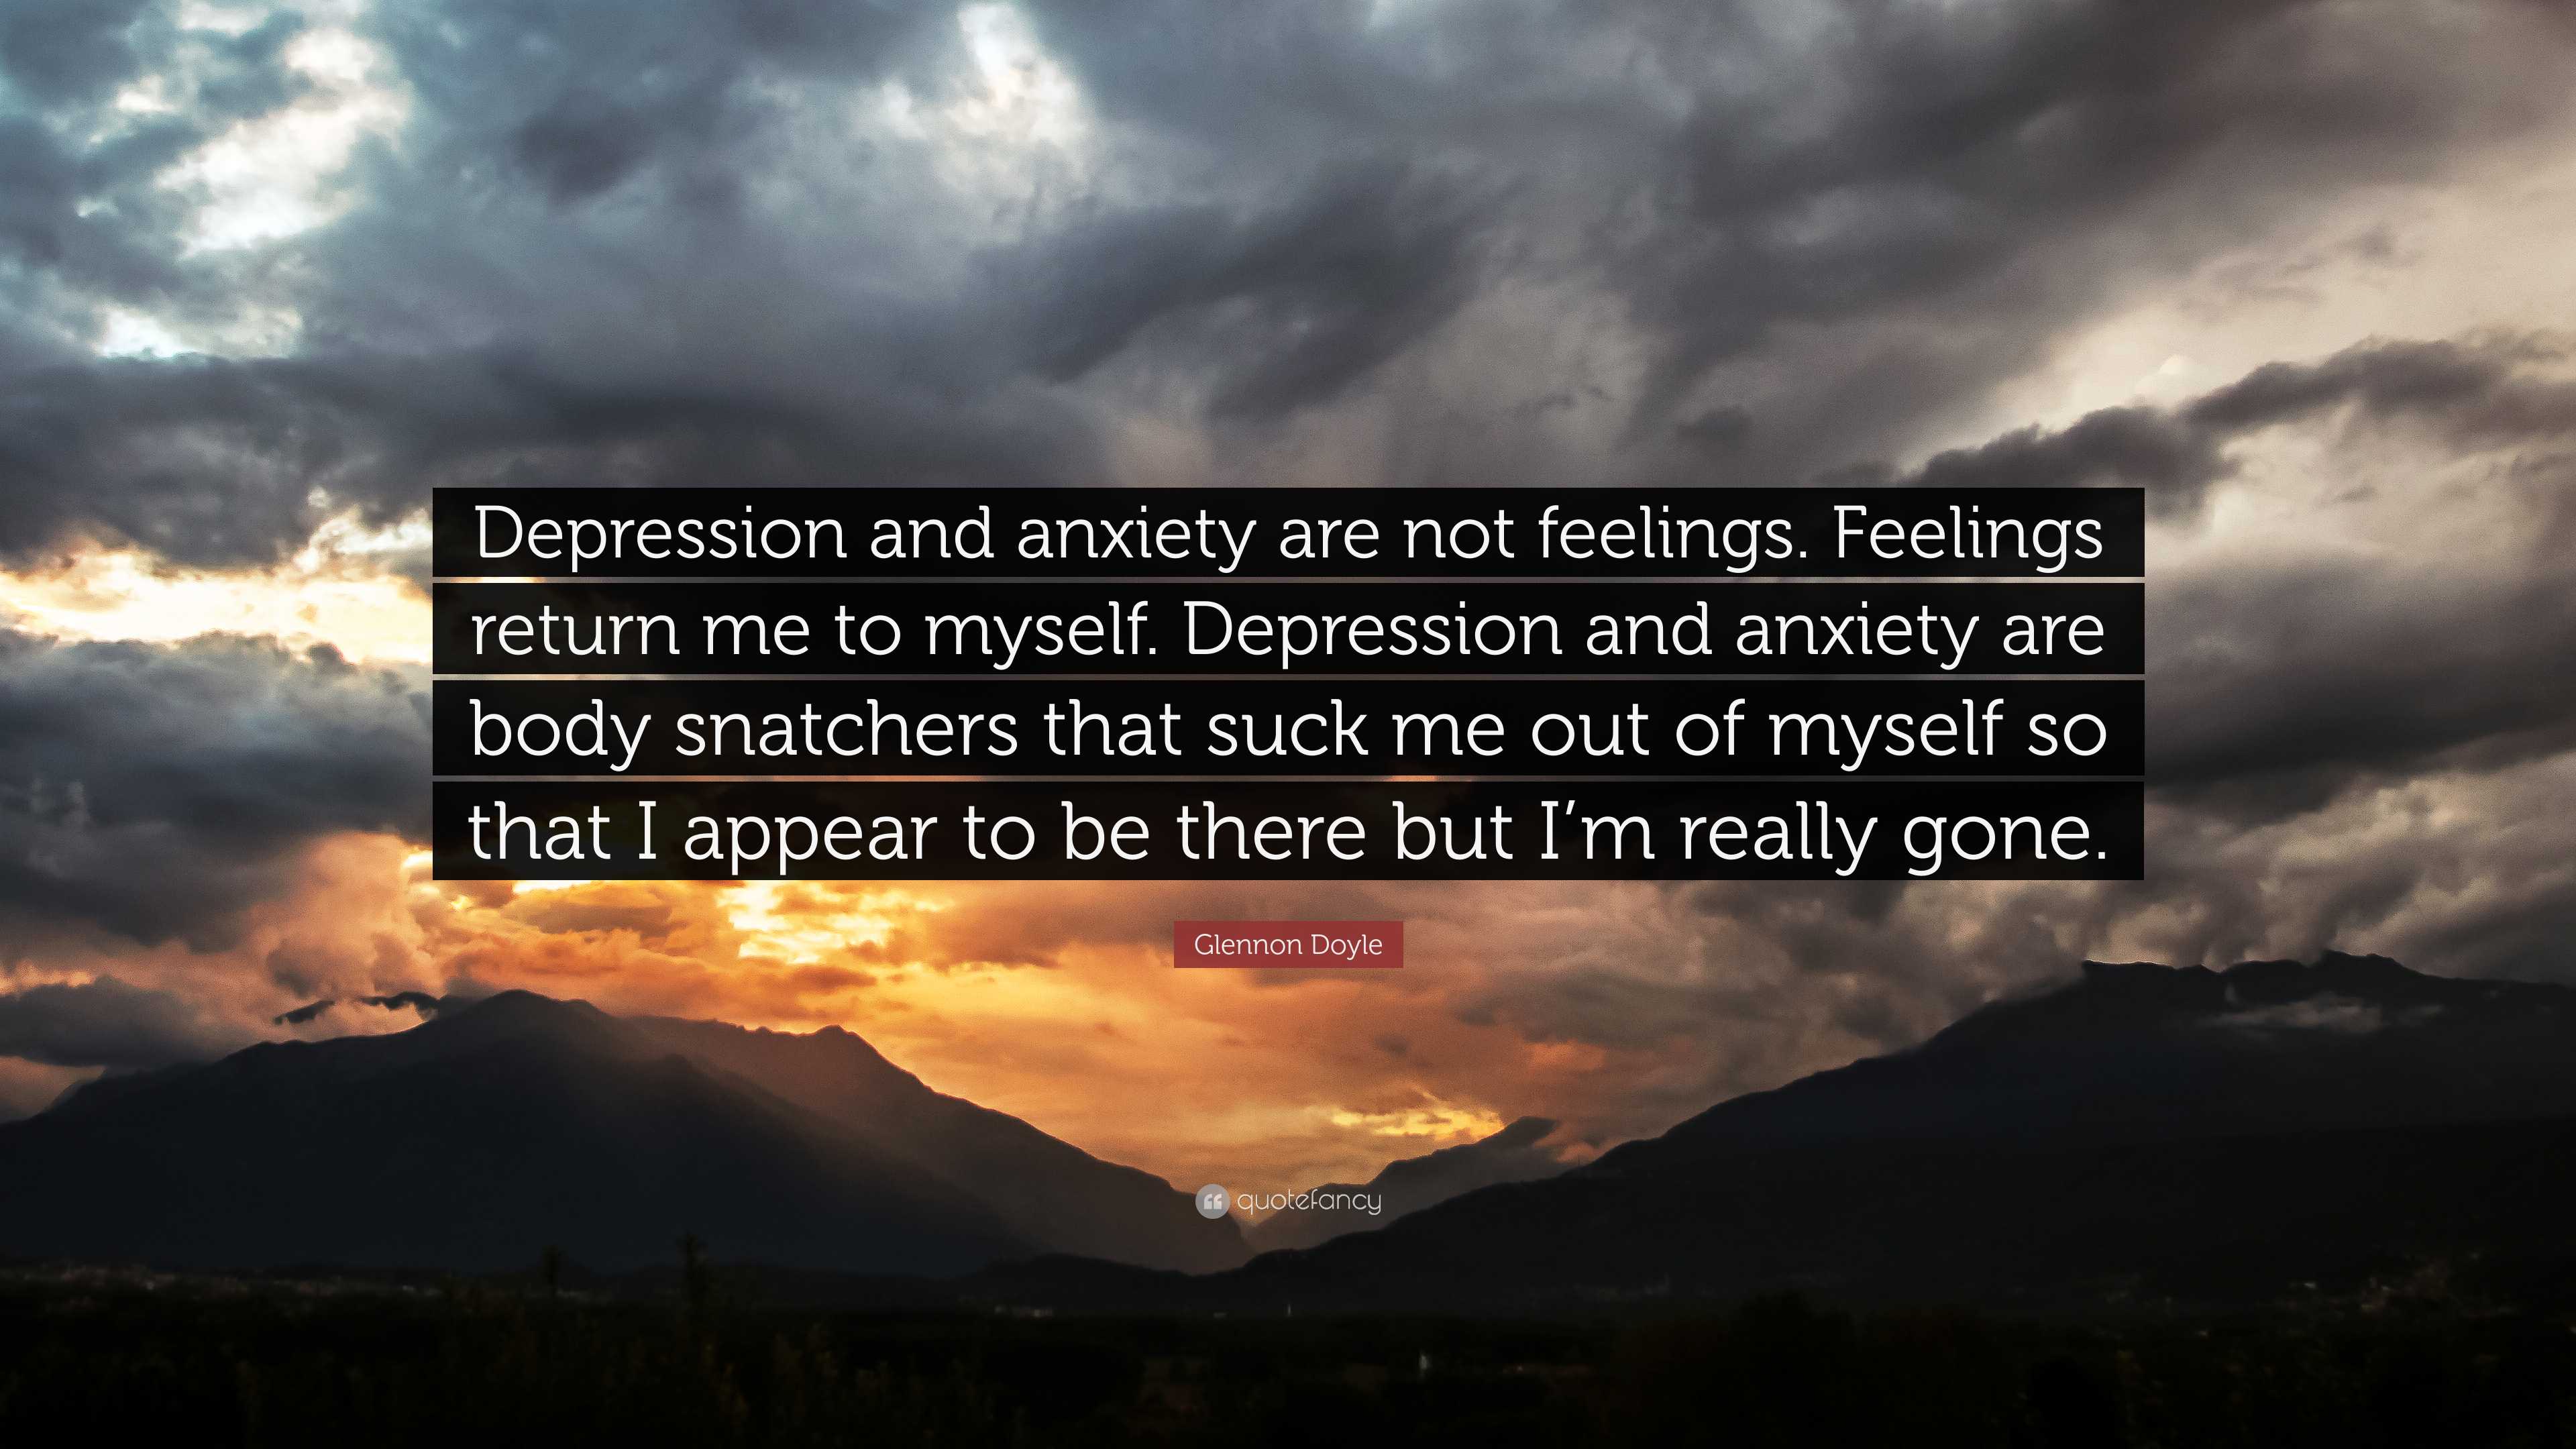 Glennon Doyle Quote: “Depression and anxiety are not feelings